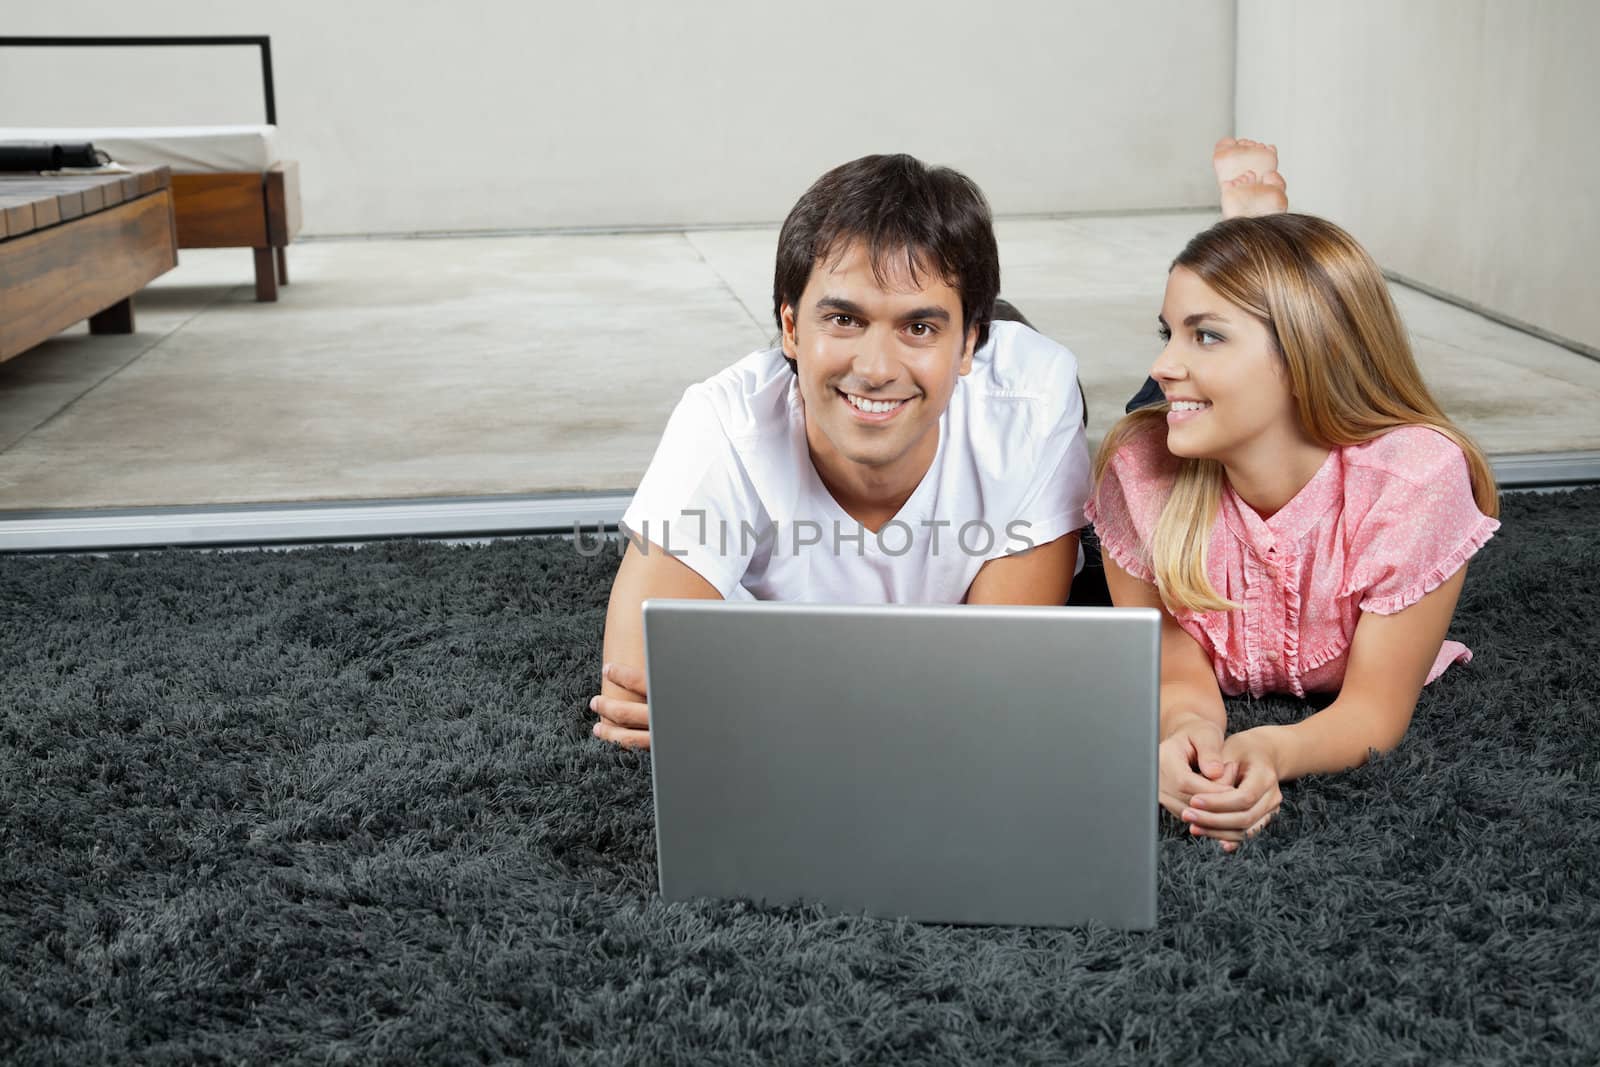 Couple With Laptop On Rug by leaf